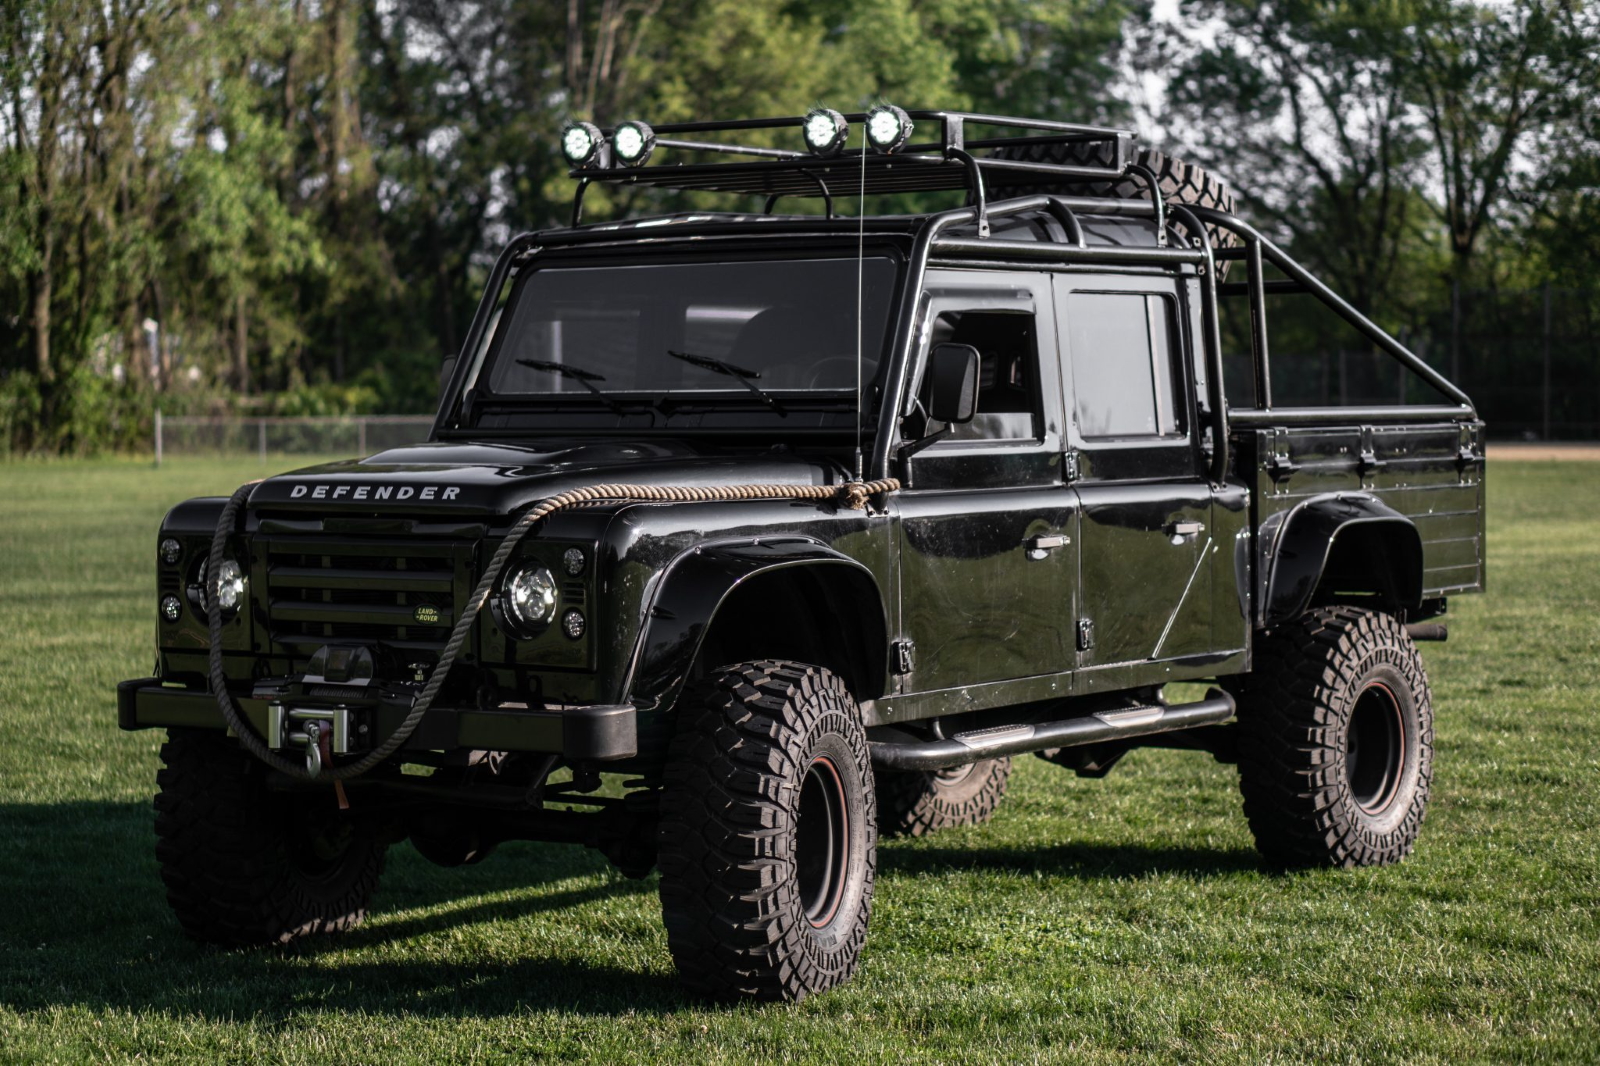 1993 Land Rover Defender 130 Customized Spectre Style Is Up For Grabs Autoevolution